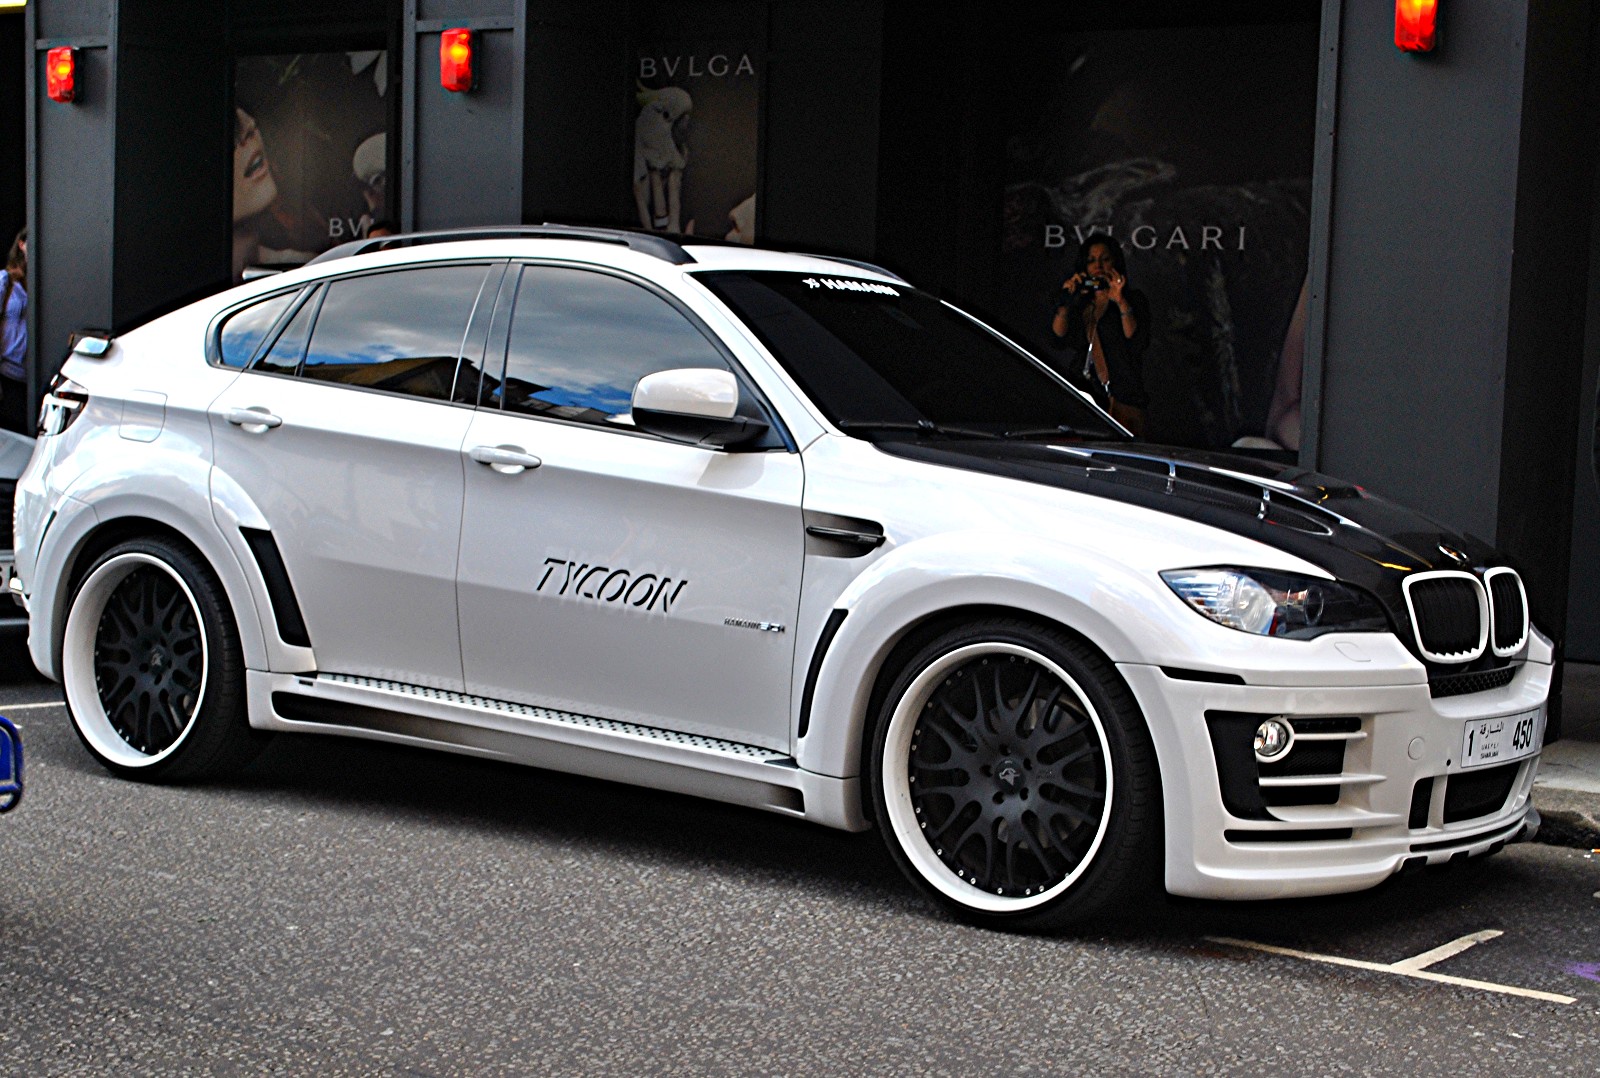   on File Bmw X6 Customised By Hamann Jpg   Wikipedia  The Free